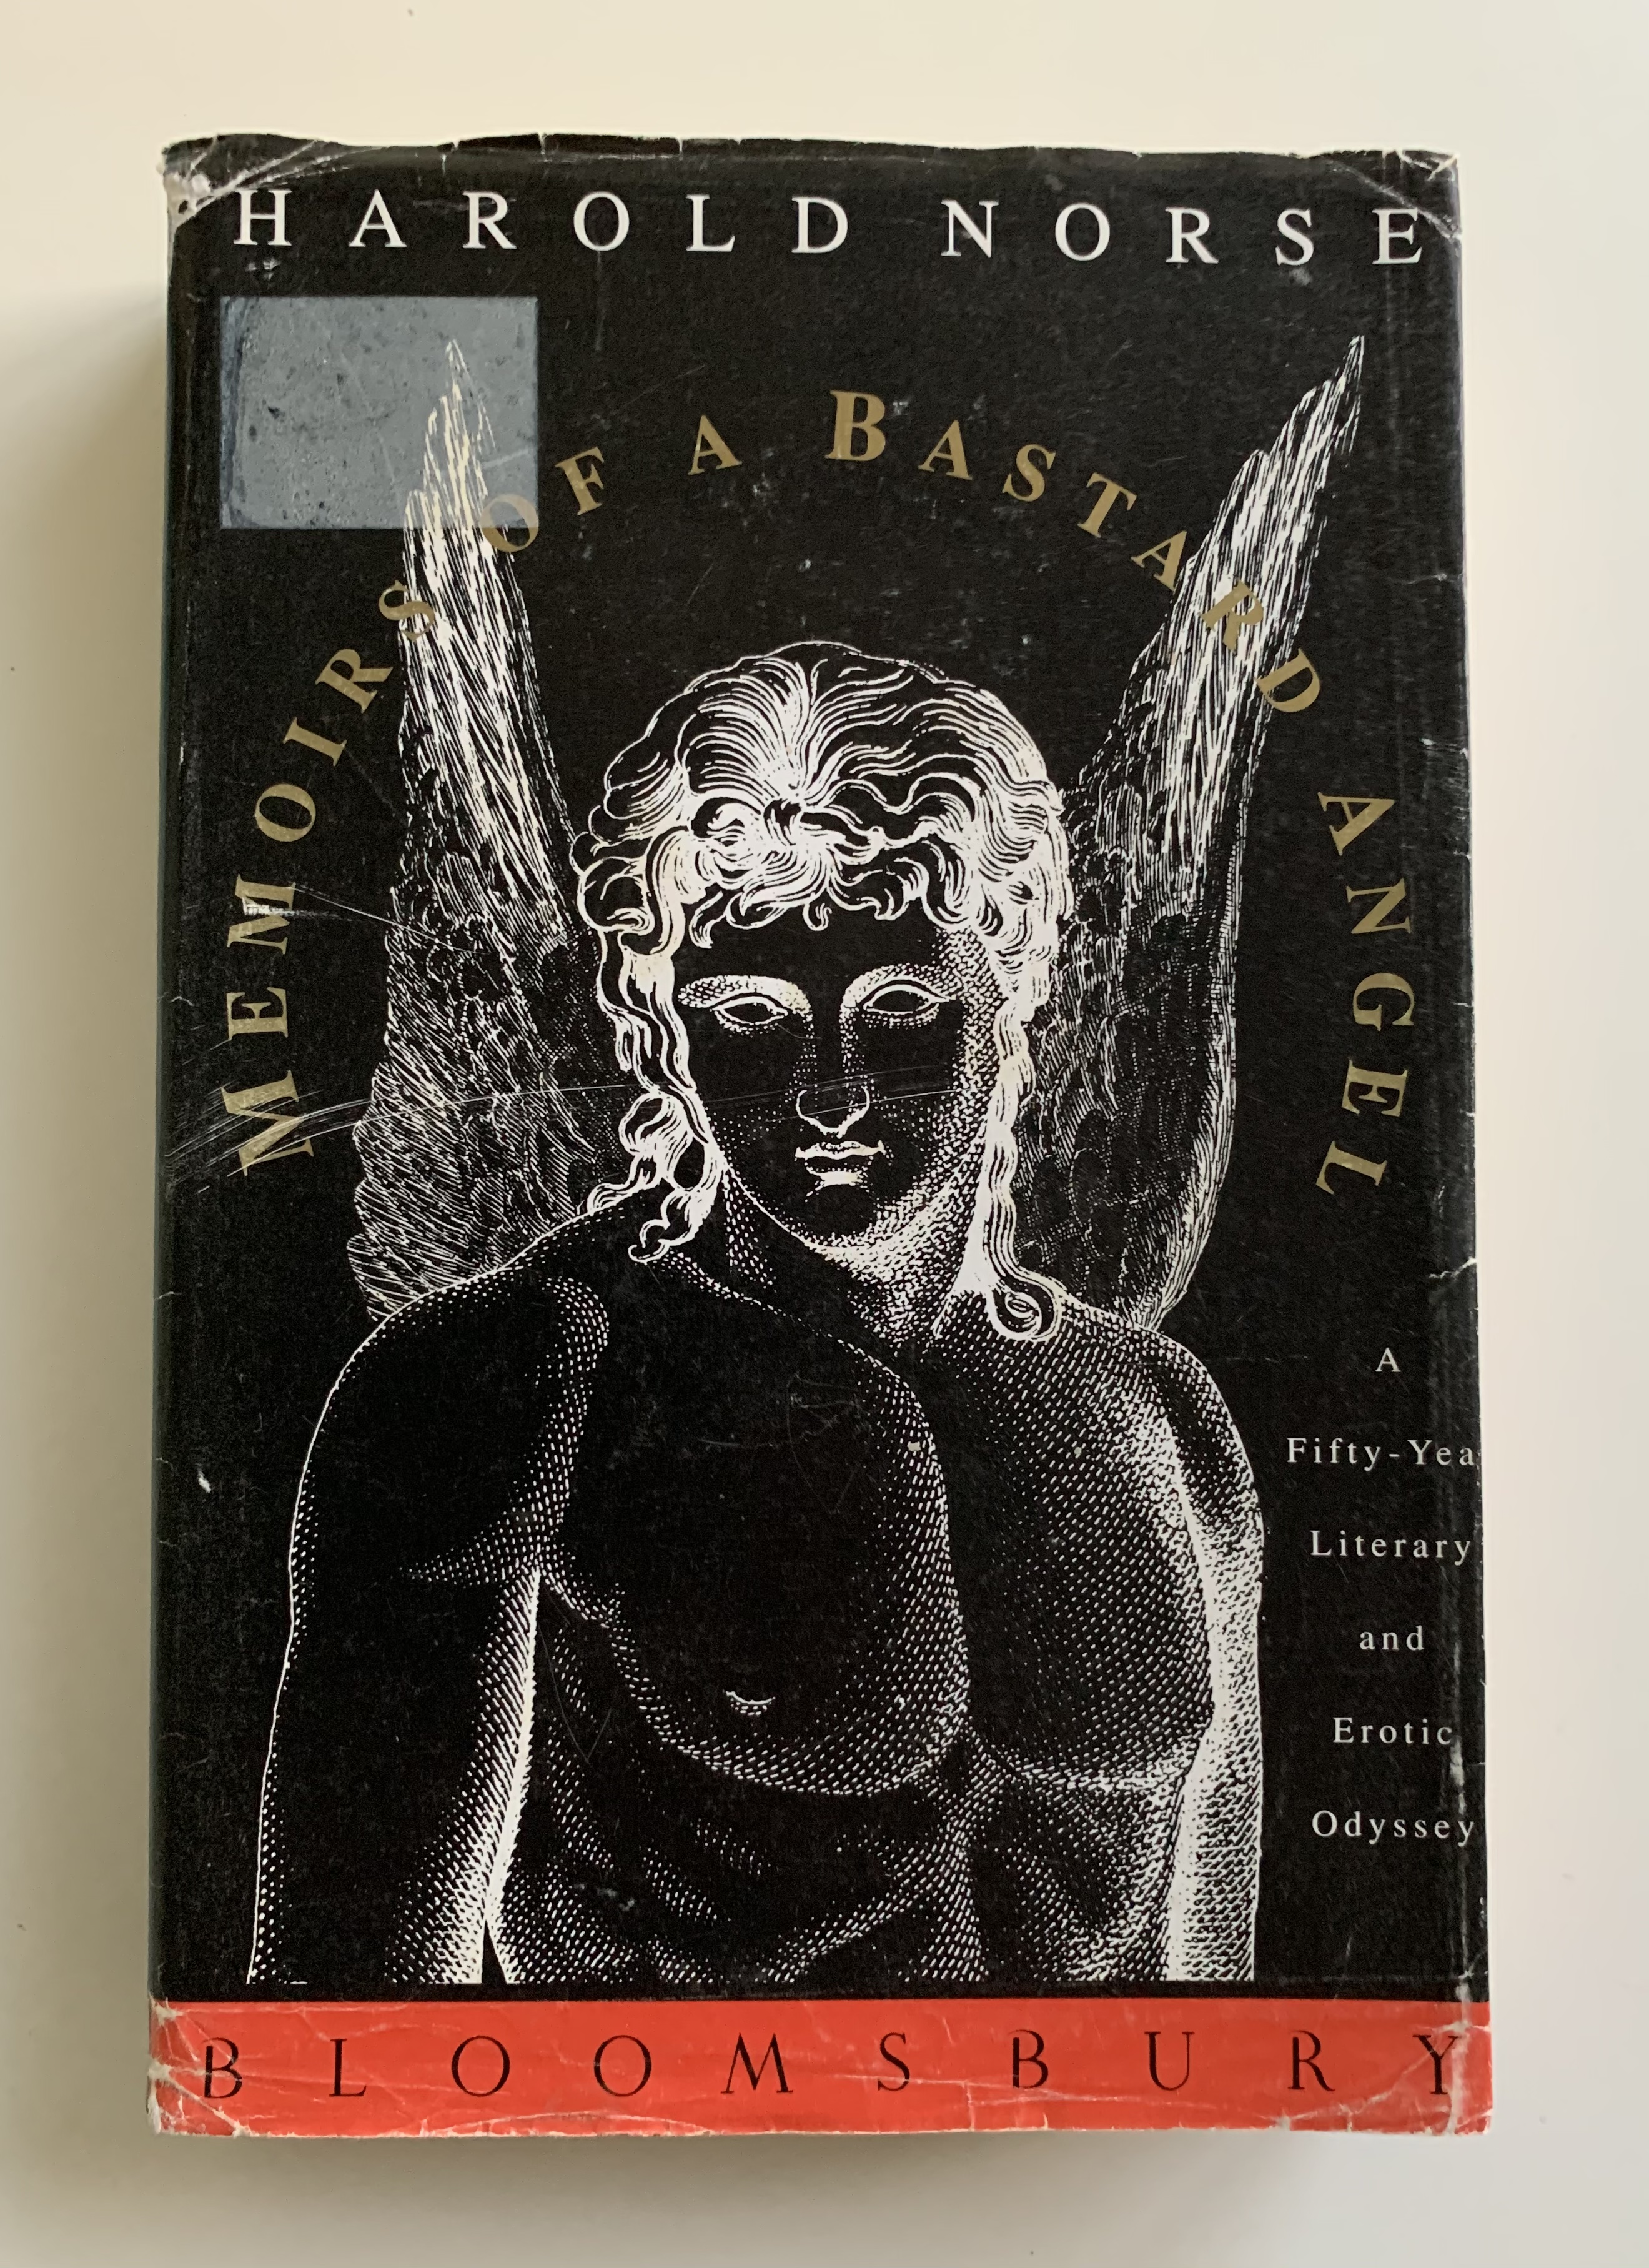 Memoirs Of A Bastard Angel: A Fifty-Year Literary and Erotic Odyssey. - NORSE, Harold.